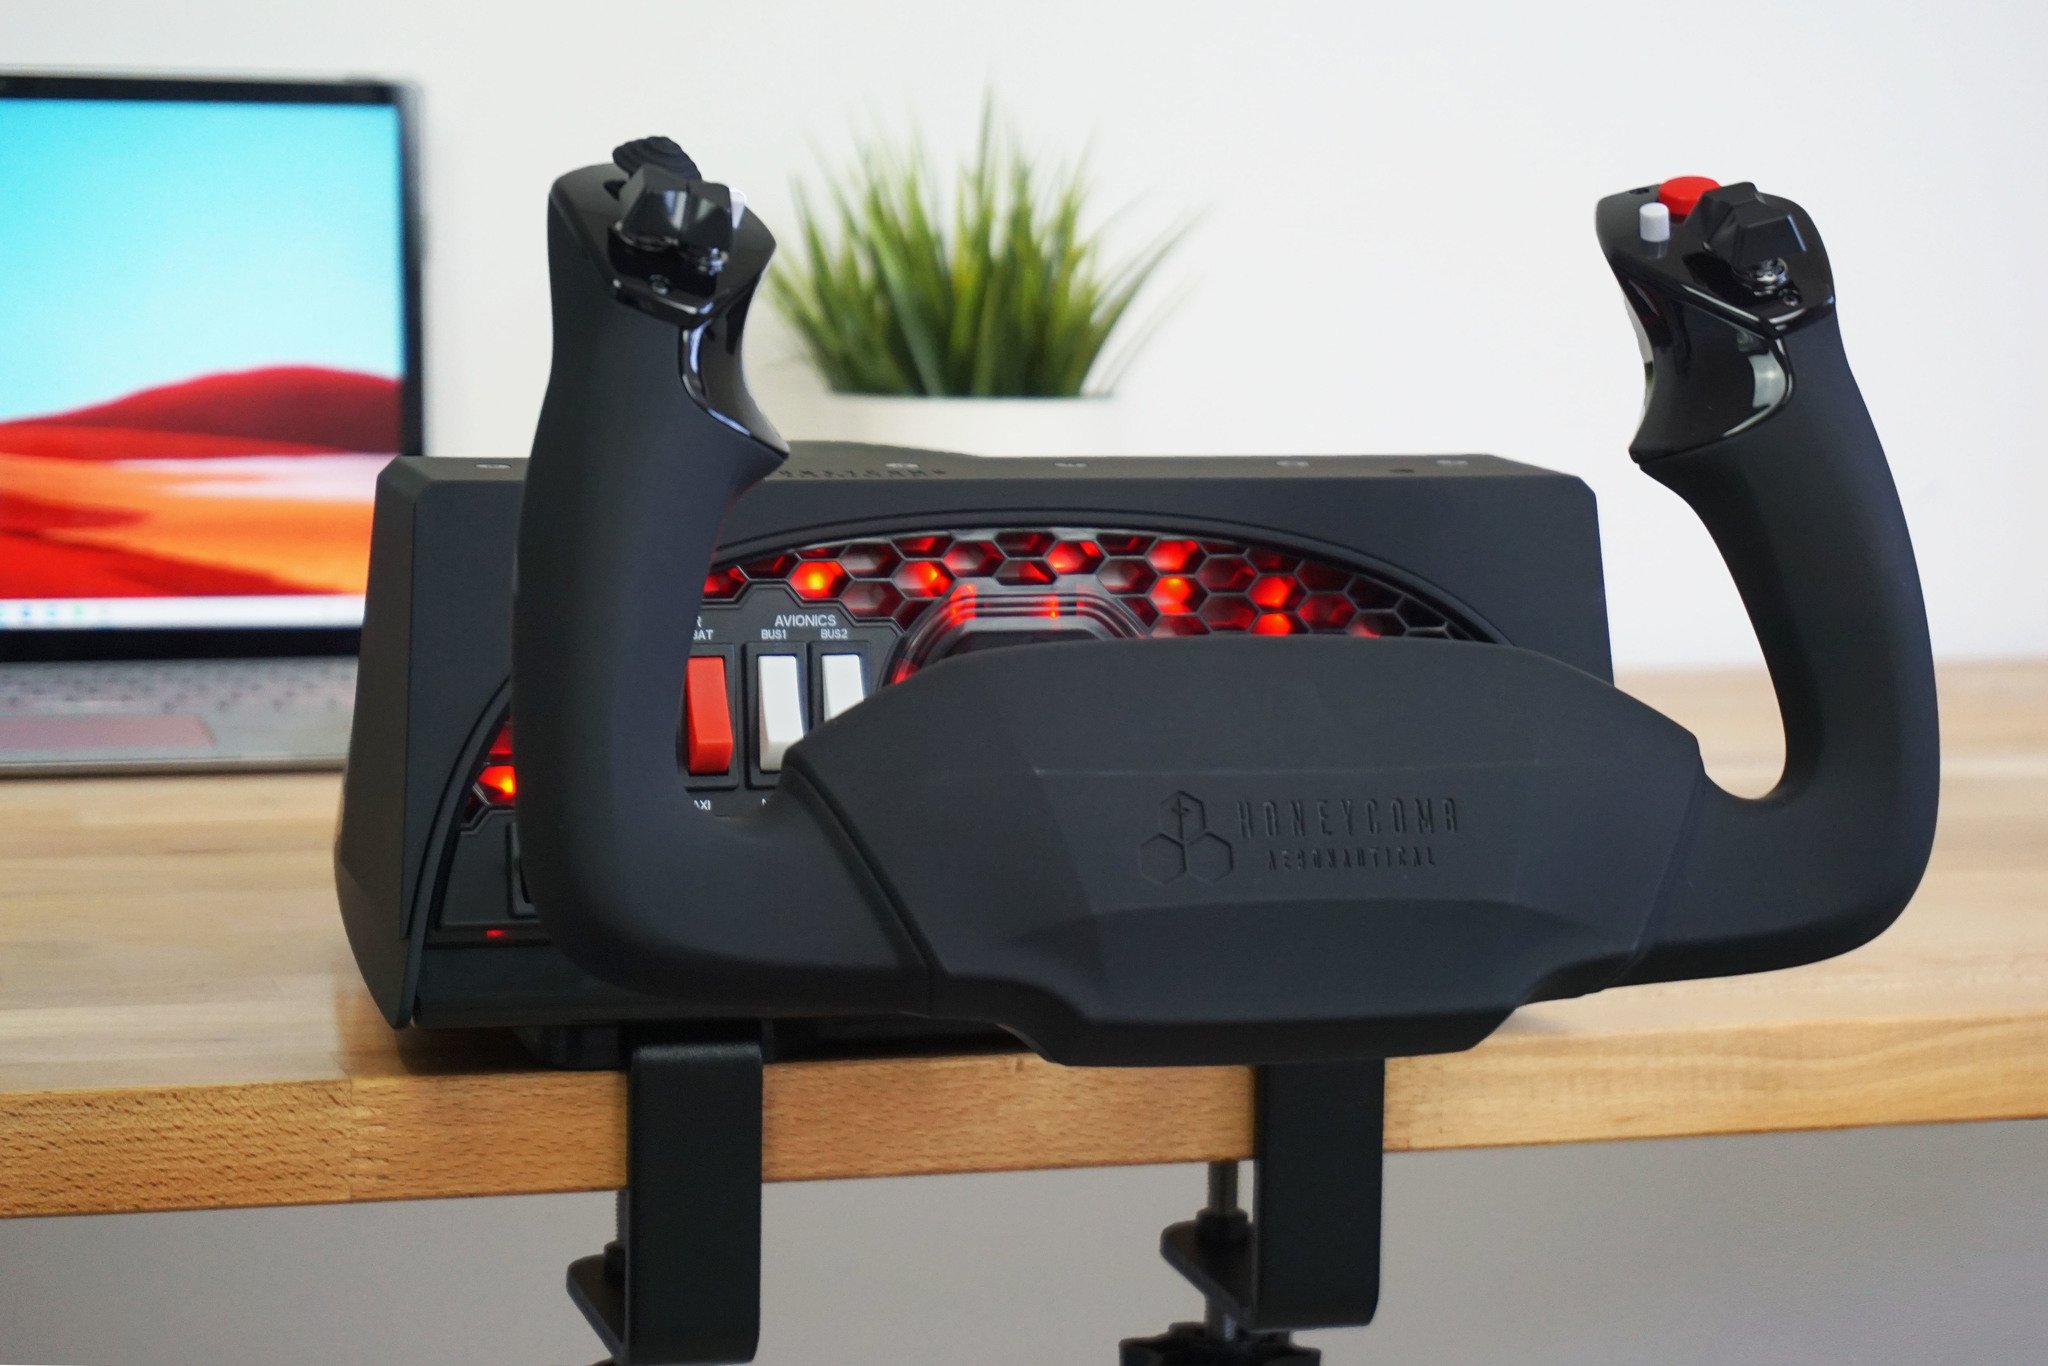 The 13 best accessories for Flight Simulator